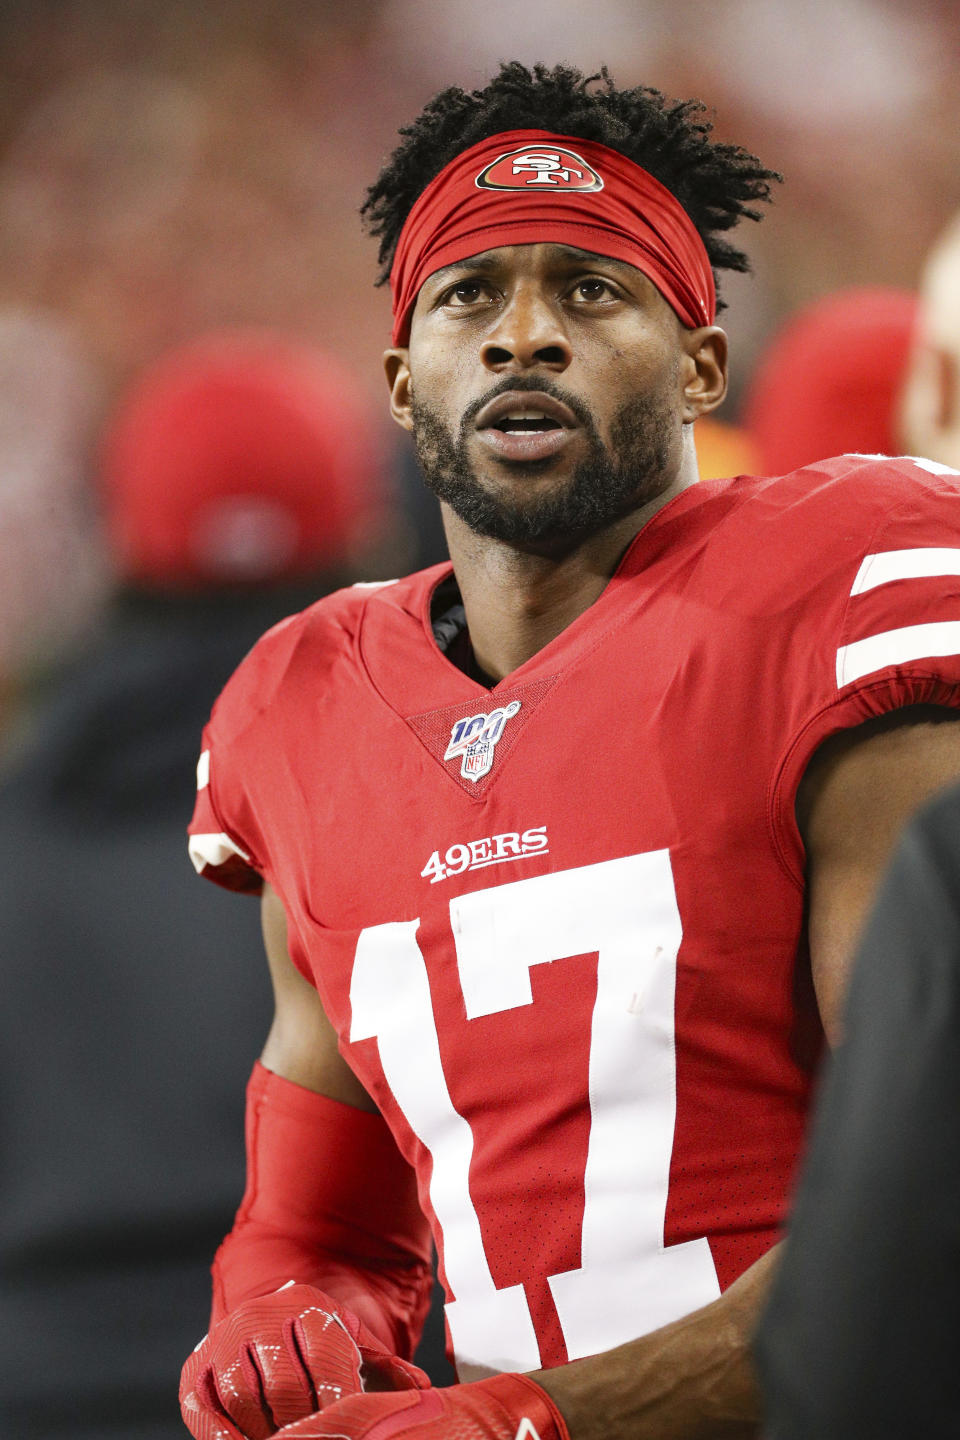 San Francisco 49ers wide receiver Emmanuel Sanders (17) takes a break in the NFL NFC Championship football game against the Green Bay Packers, Sunday, Jan. 19, 2020 in Santa Clara, Calif. The 49ers defeated the Packers 37-20. (Margaret Bowles via AP)